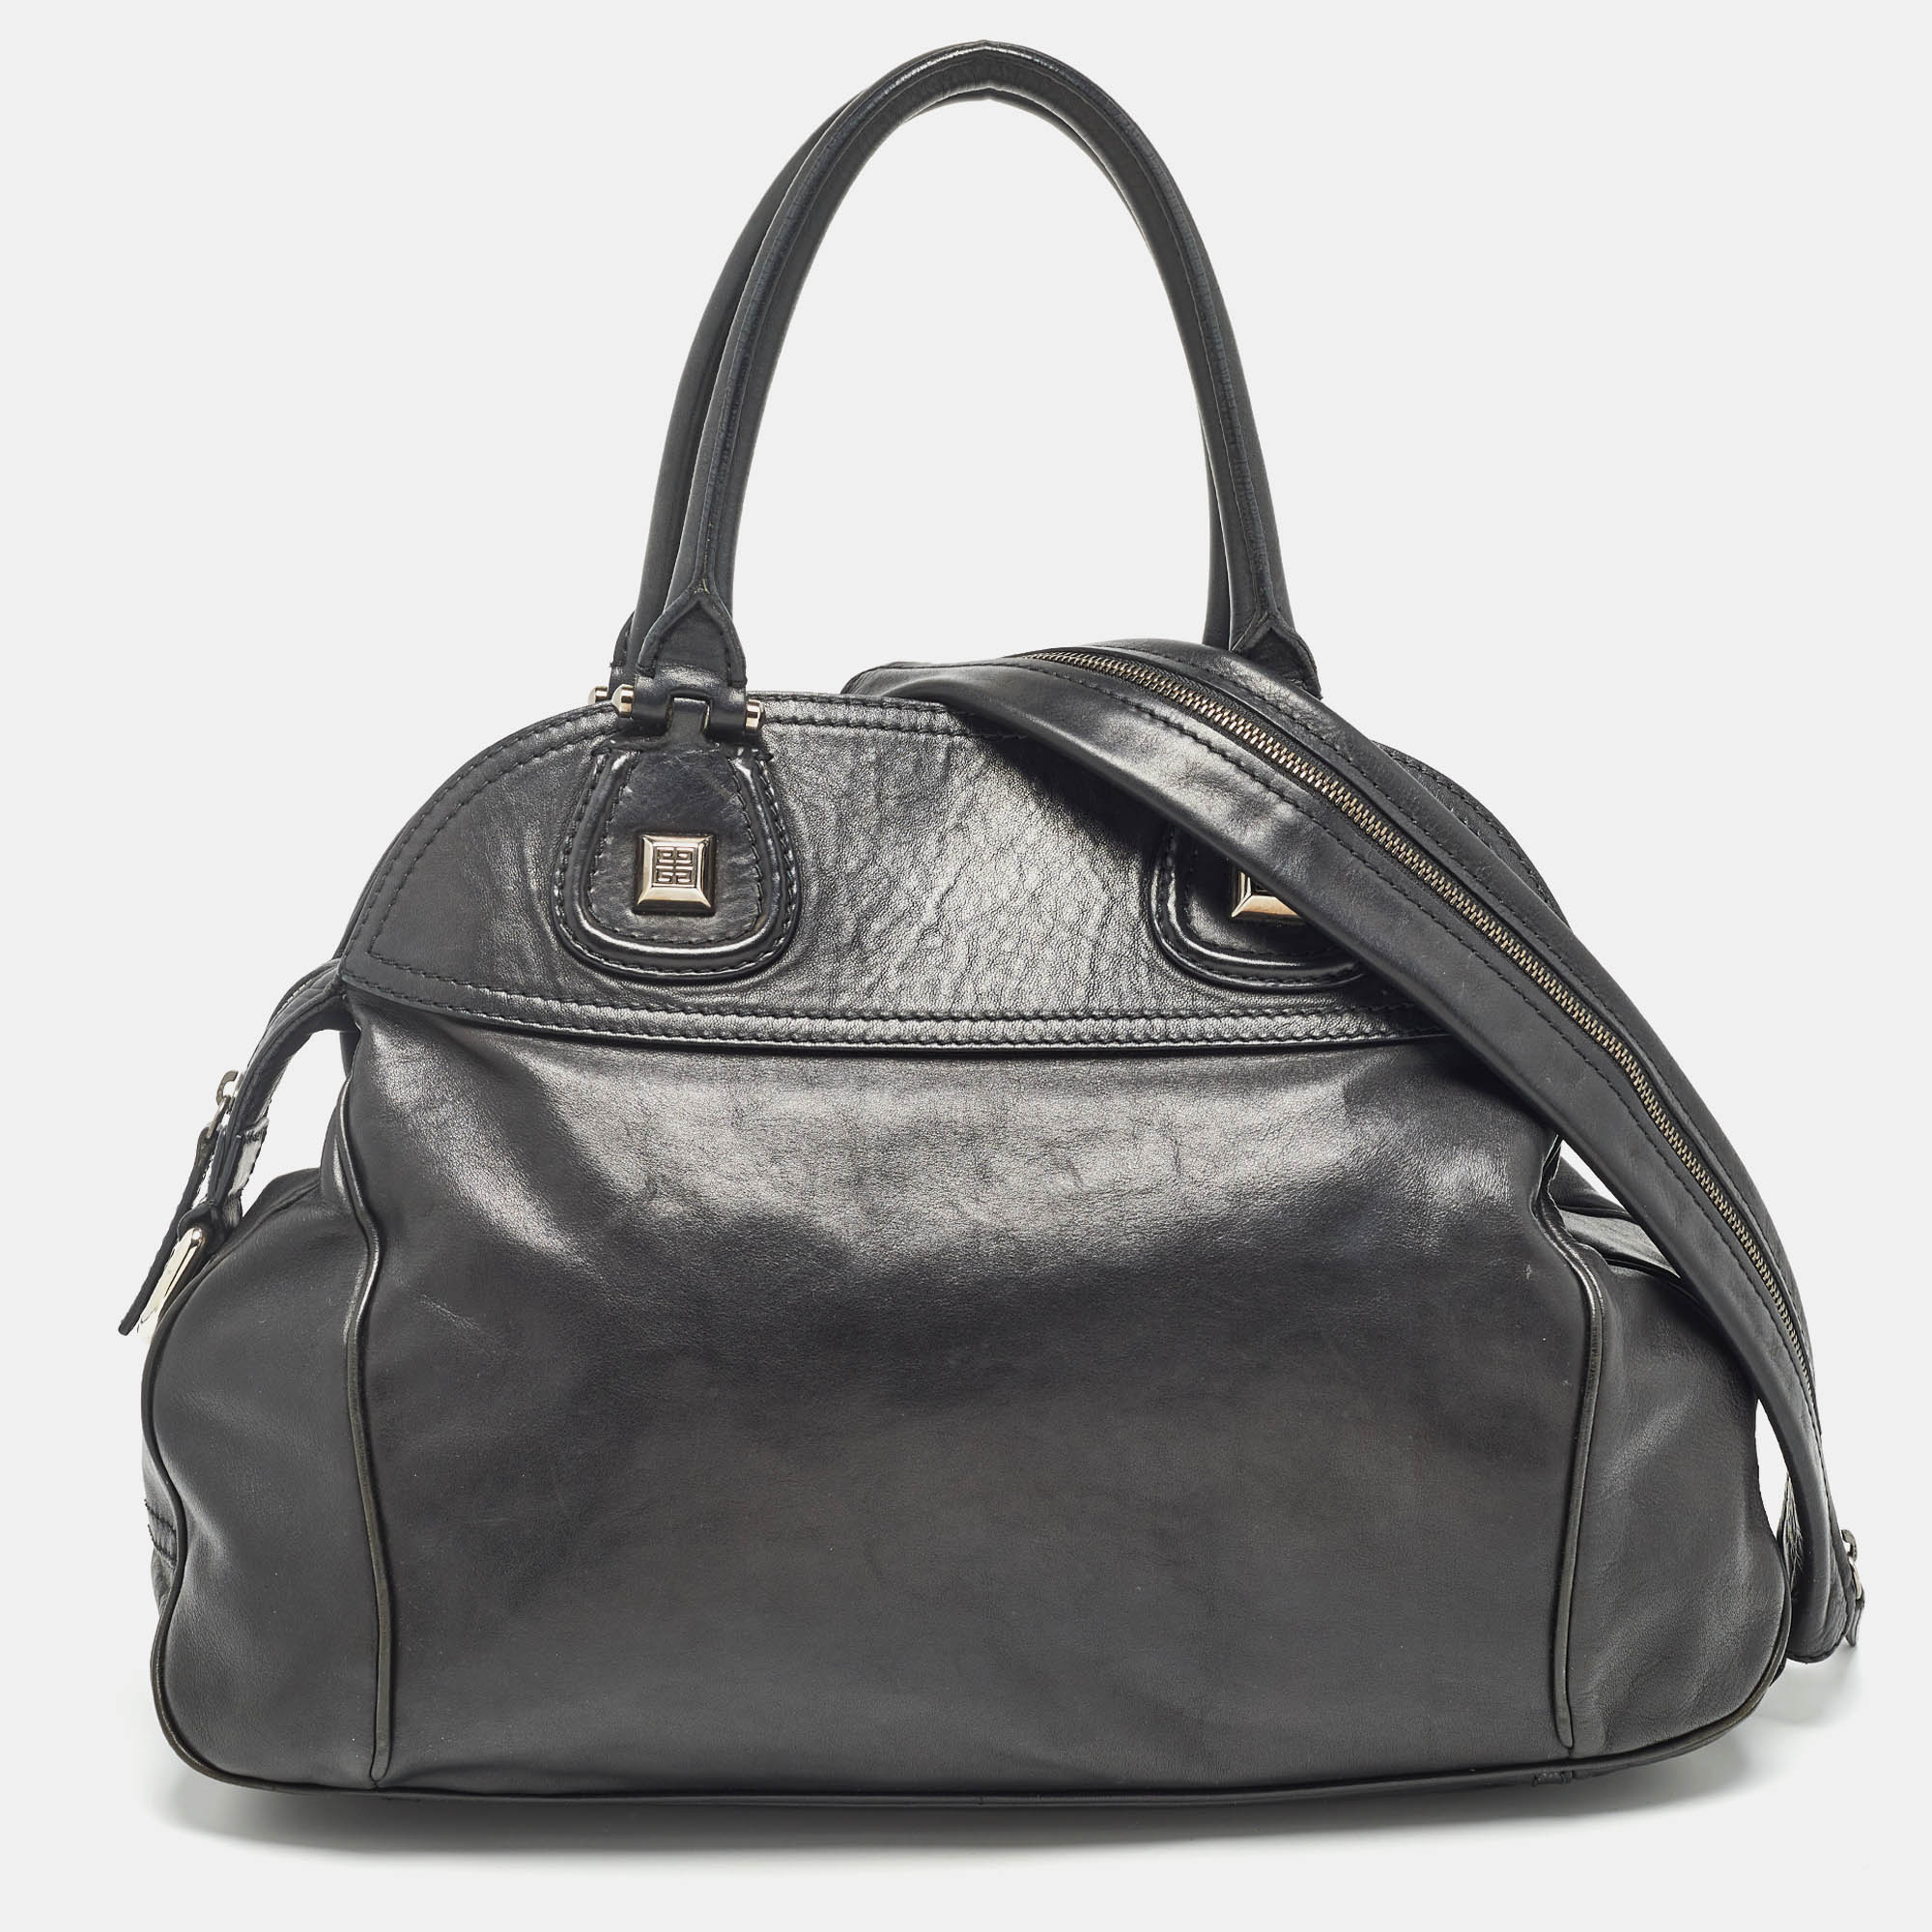 

Givenchy Black Leather Zip Dome Satchel